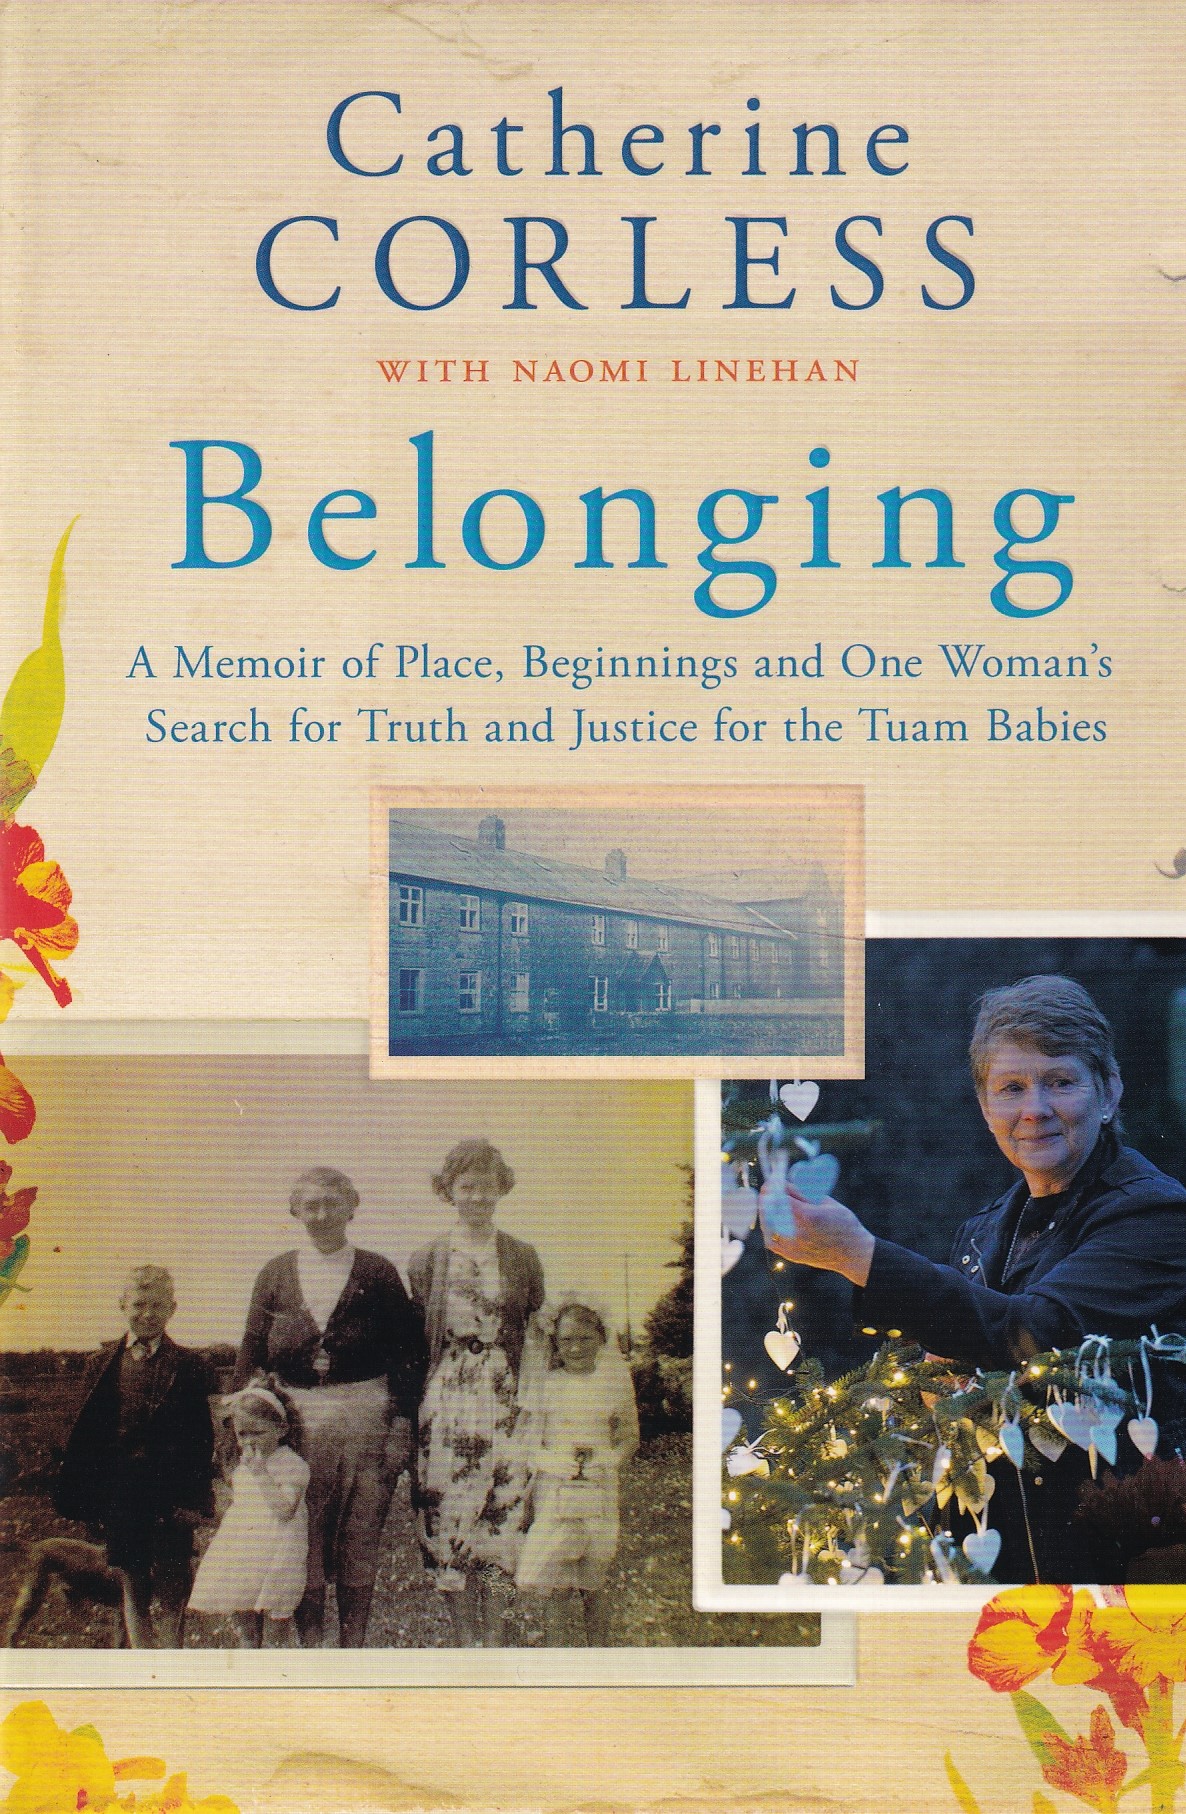 Belonging: A Memoir of Place, Beginnings and One Woman’s Search for Truth and Justice for the Tuam Babies | Catherine Corless | Charlie Byrne's